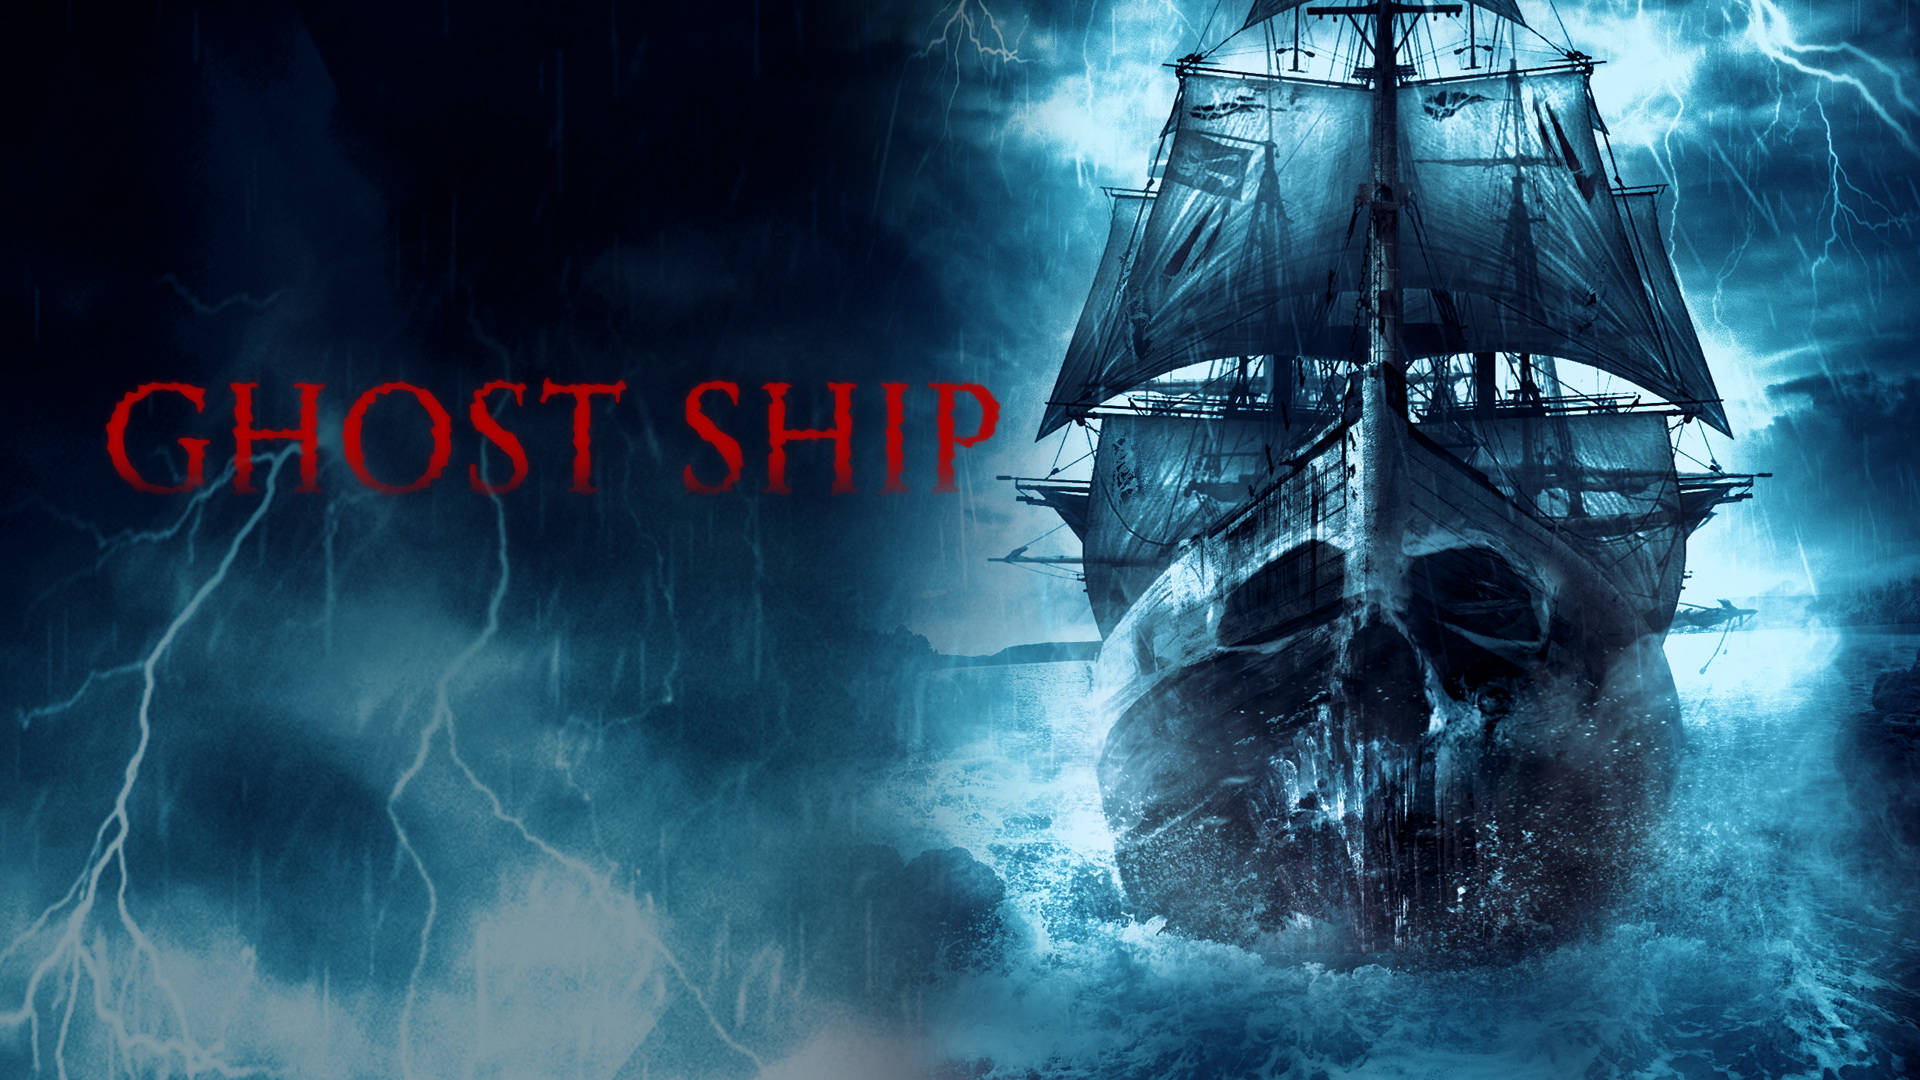 Ghost Ship Horror Movie Poster Background